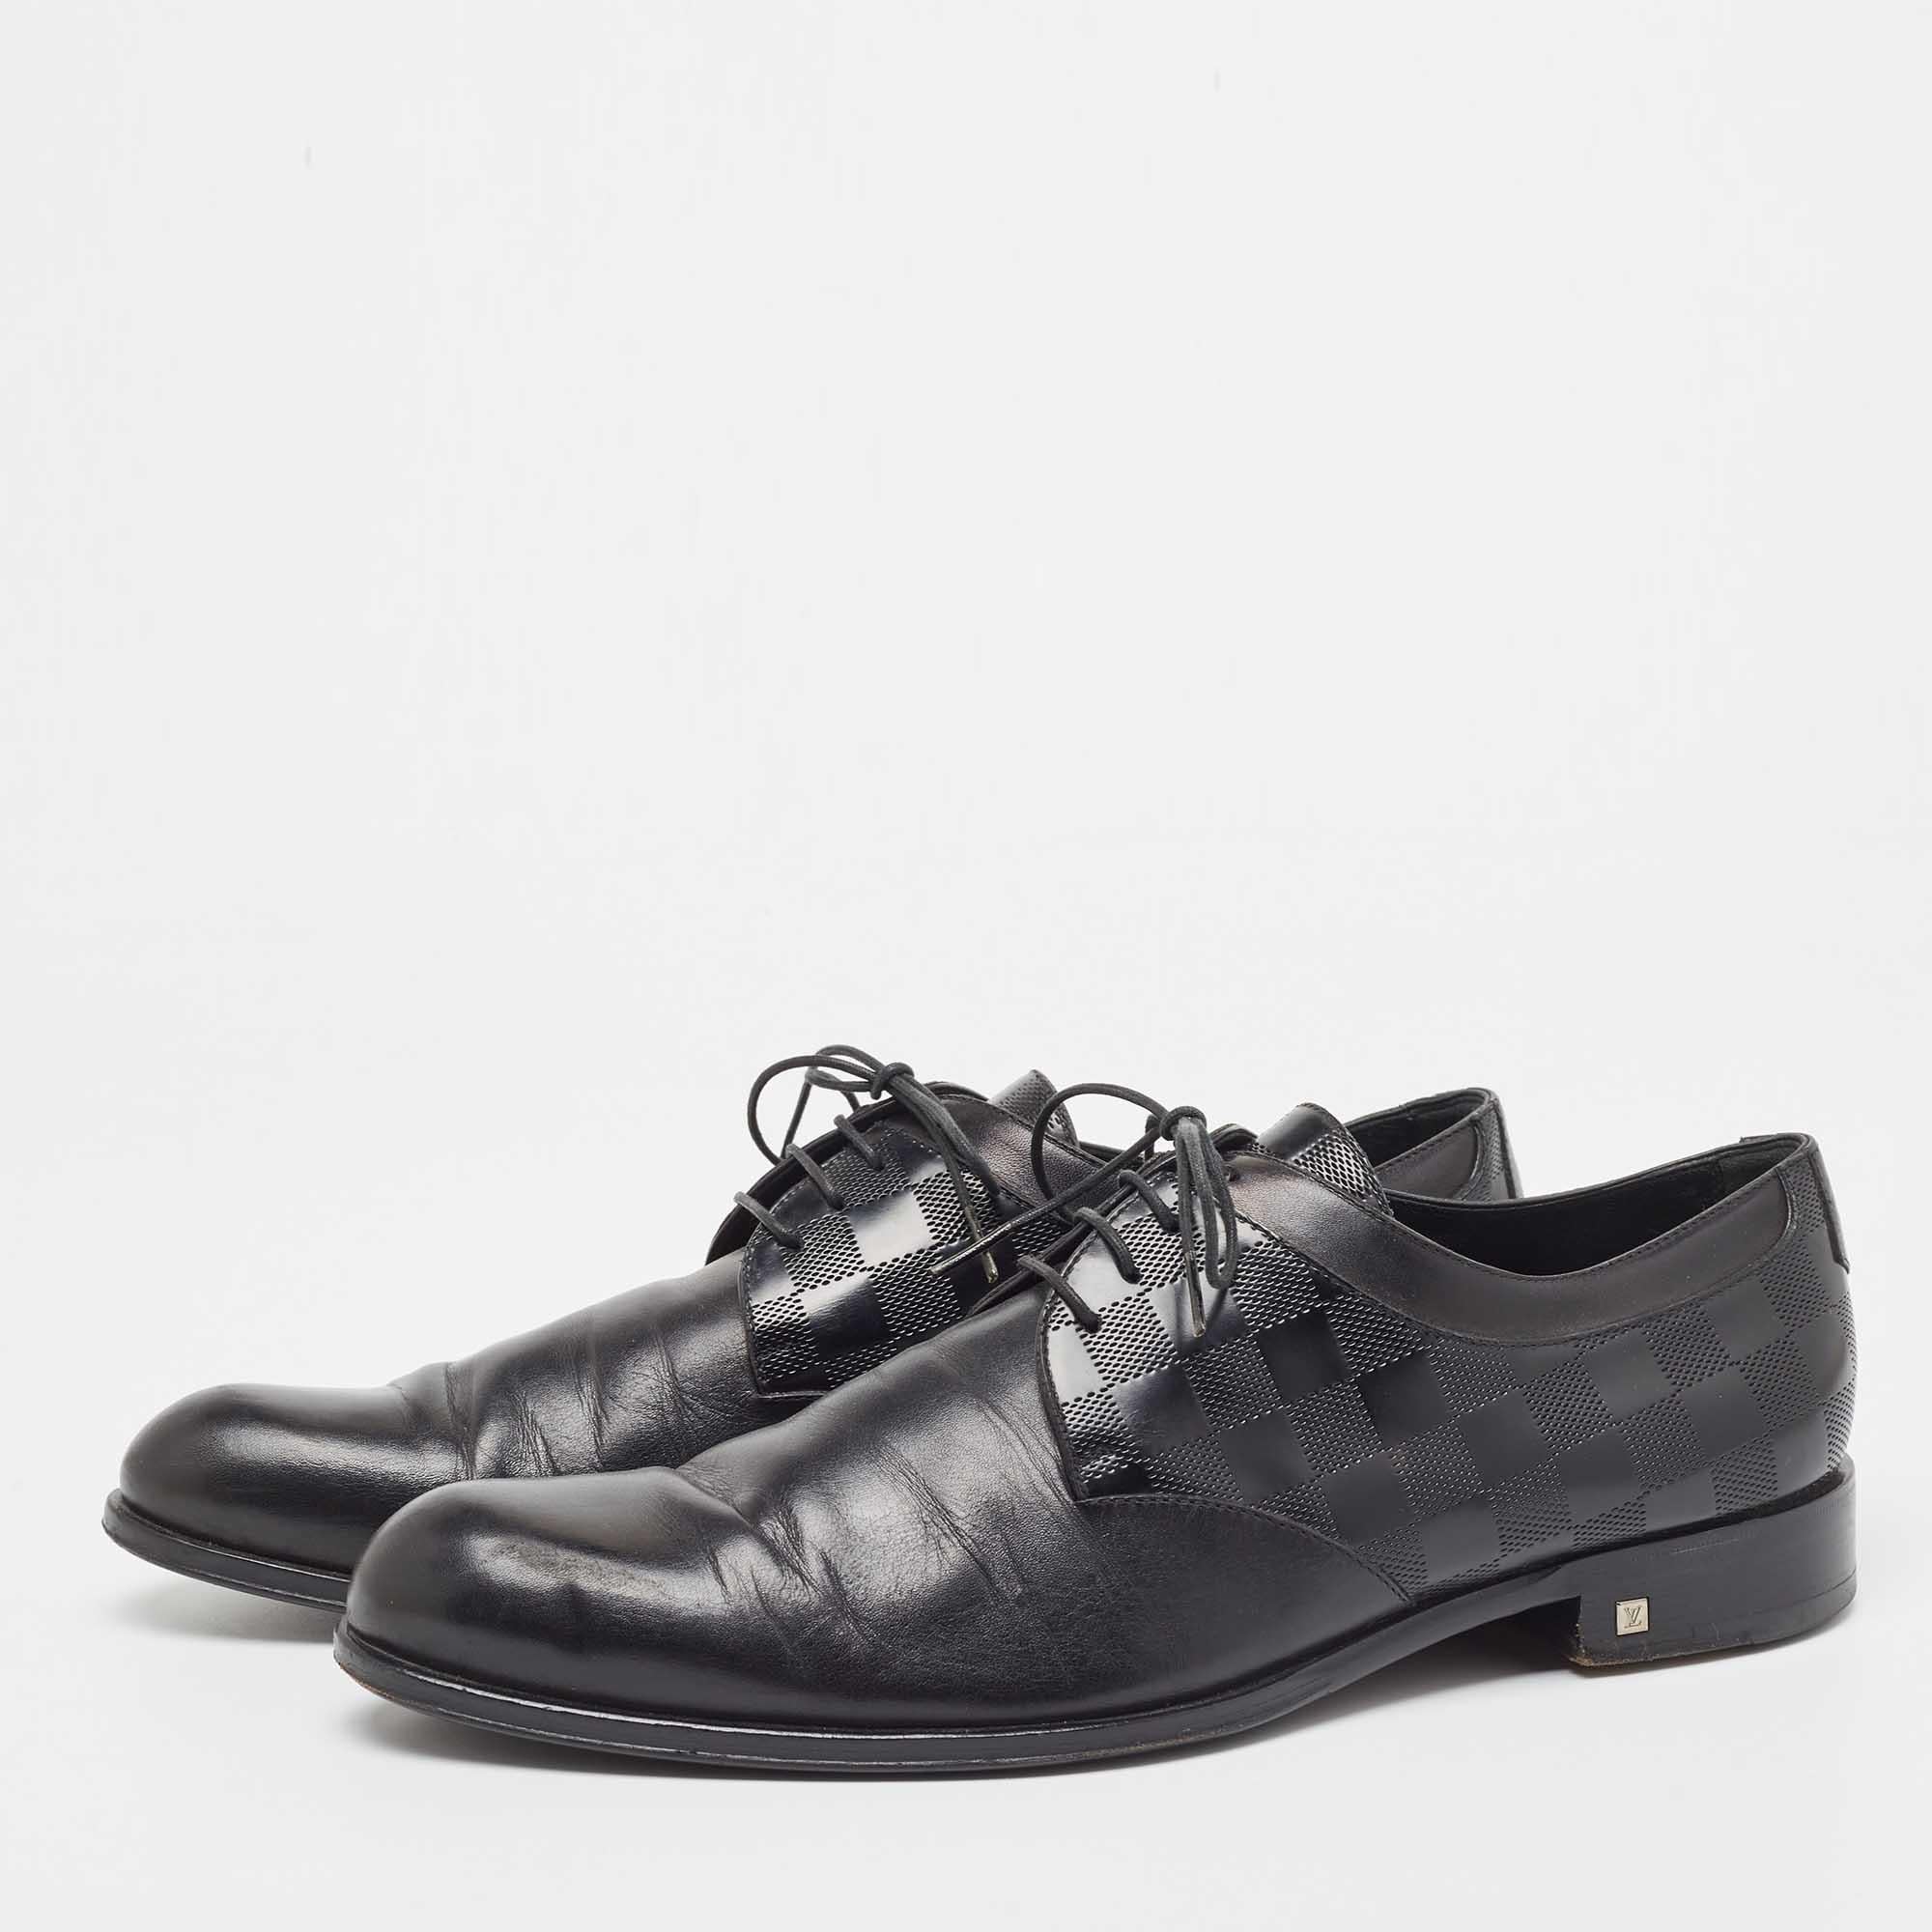 Louis Vuitton Black Damier Embossed Leather Lace Up Oxford Size 43 For Sale 3